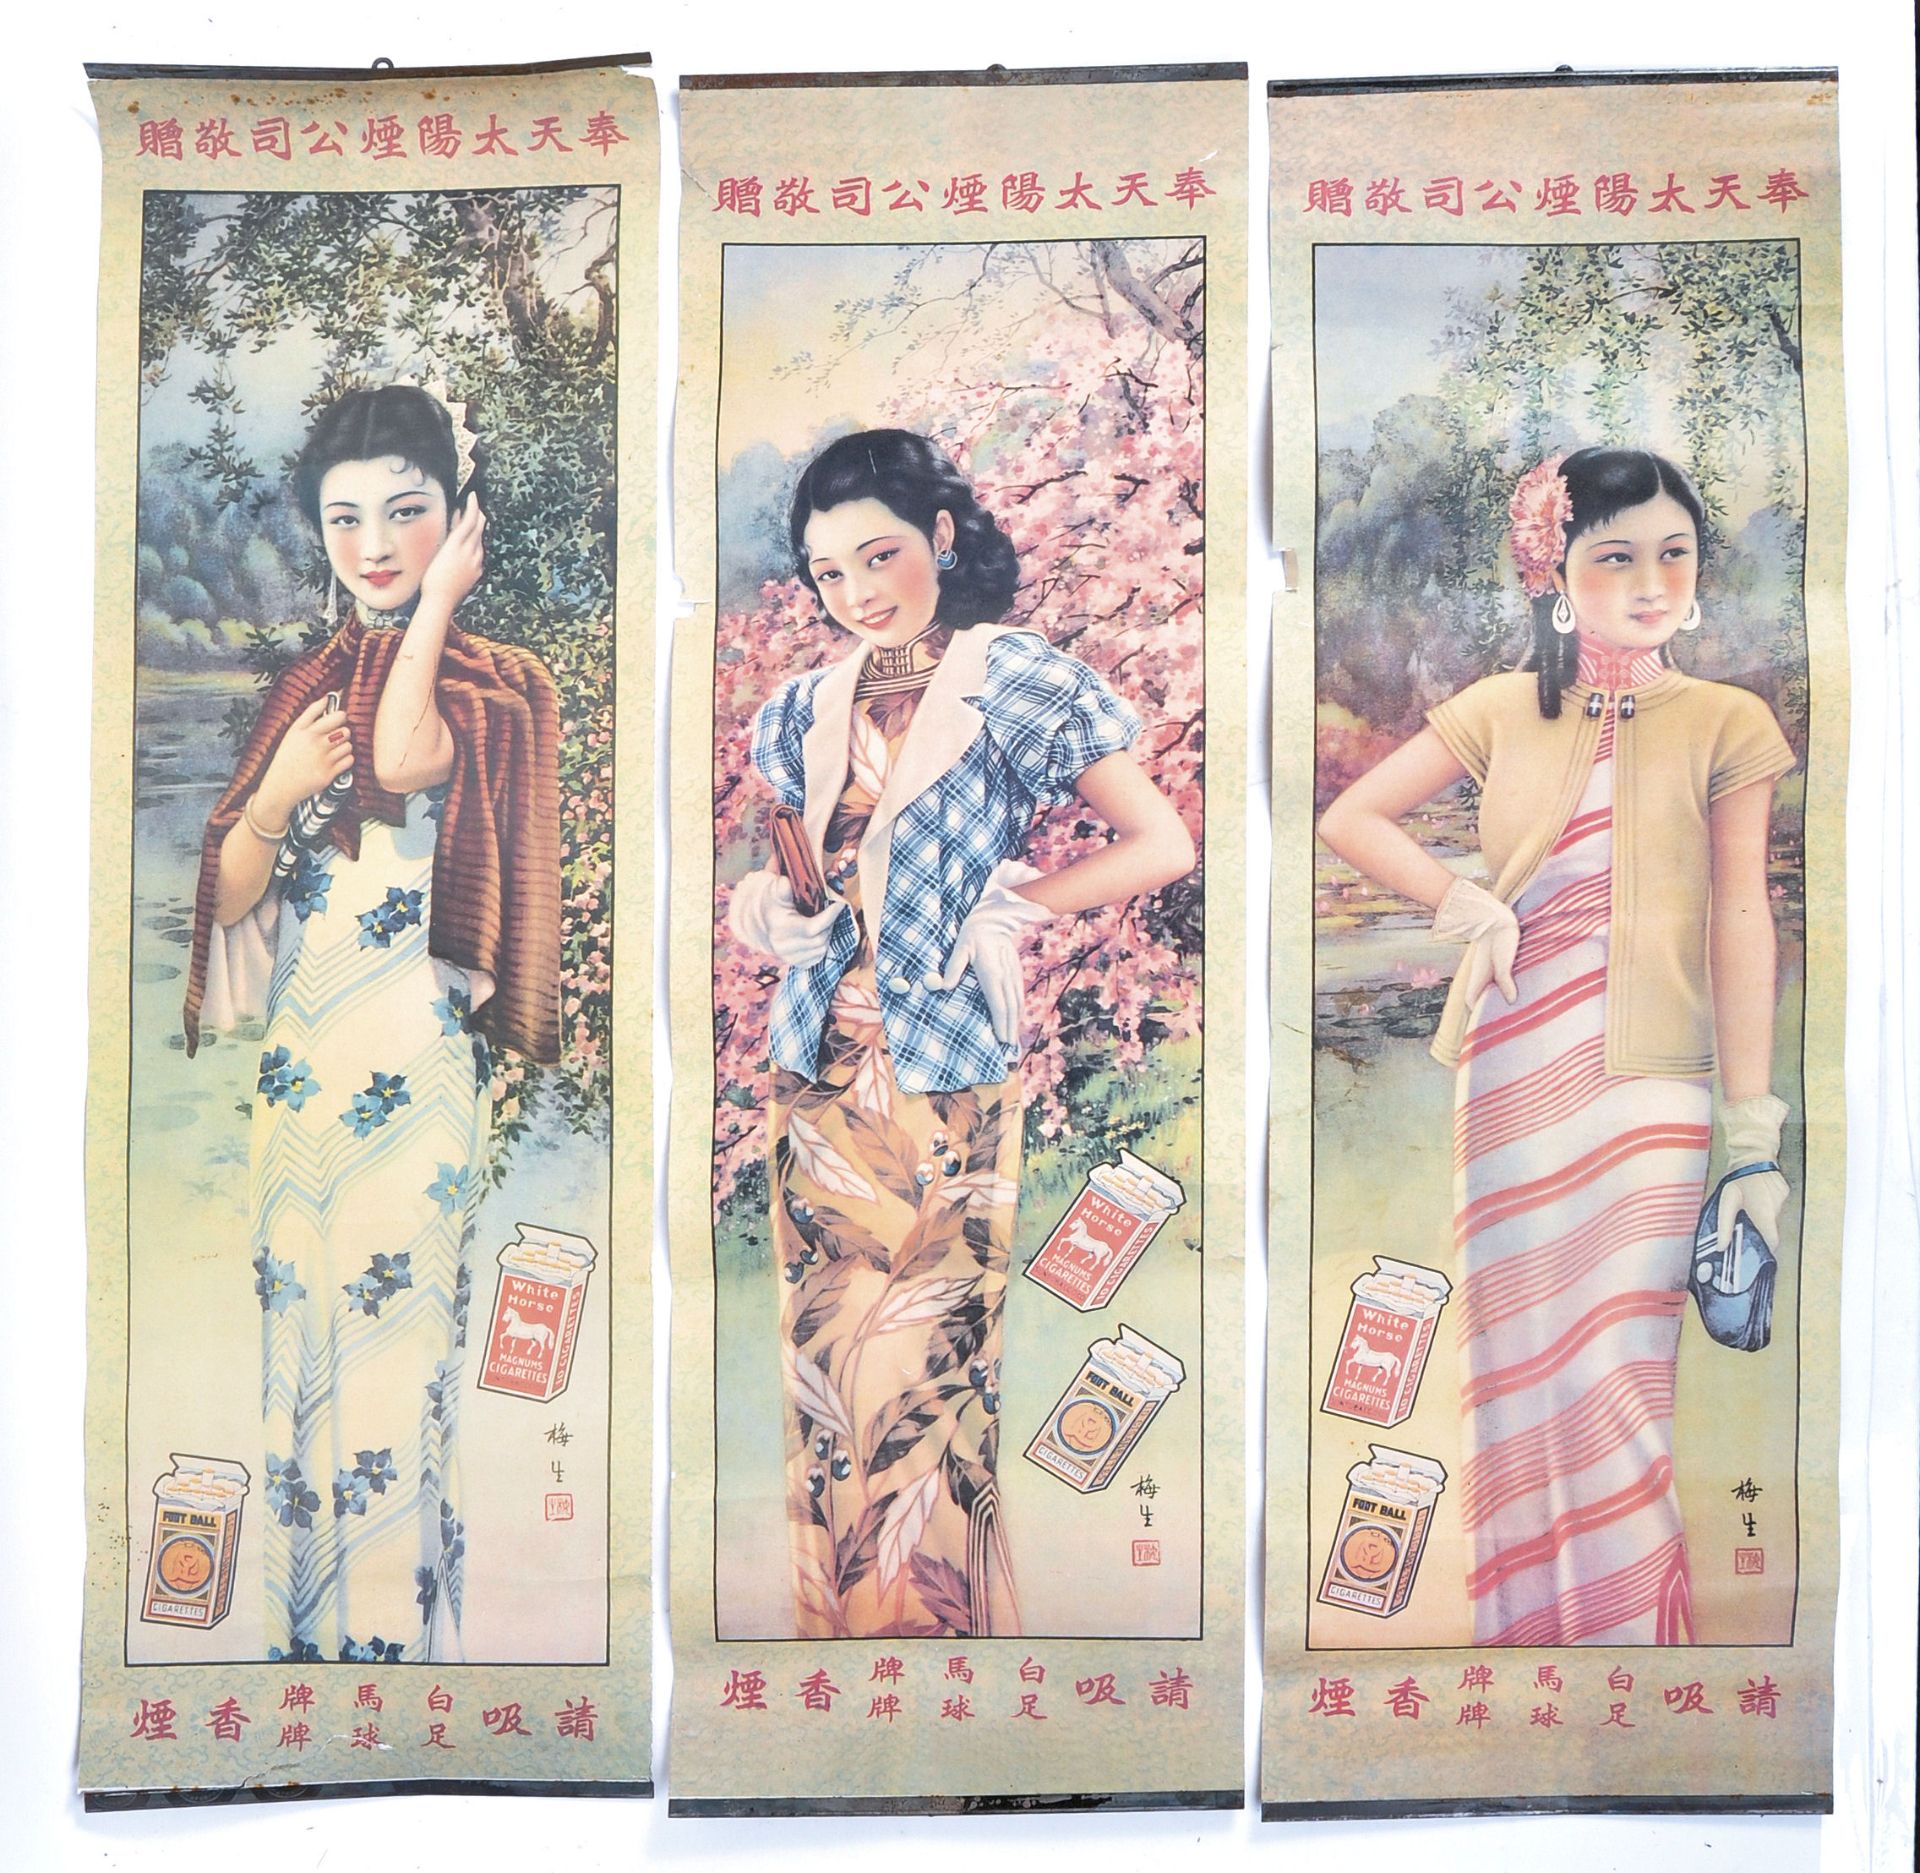 RARE VINTAGE CHINESE CIGARETTE ADVERTISING POSTERS